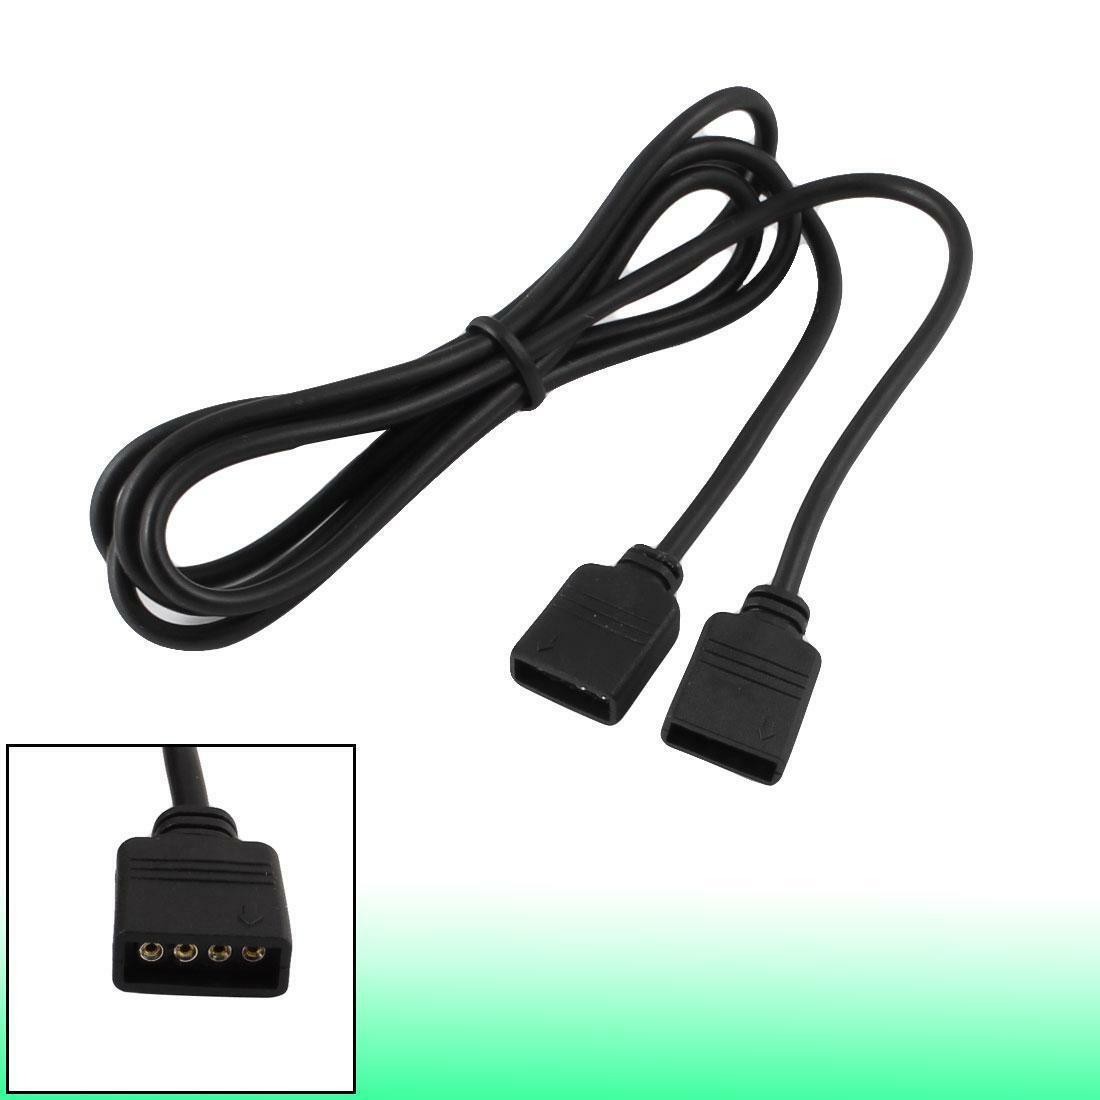 4 pin - 3ft. LED extension cord - fits SMD 3528 5050 5630 16ft 5m LED Lights RGB